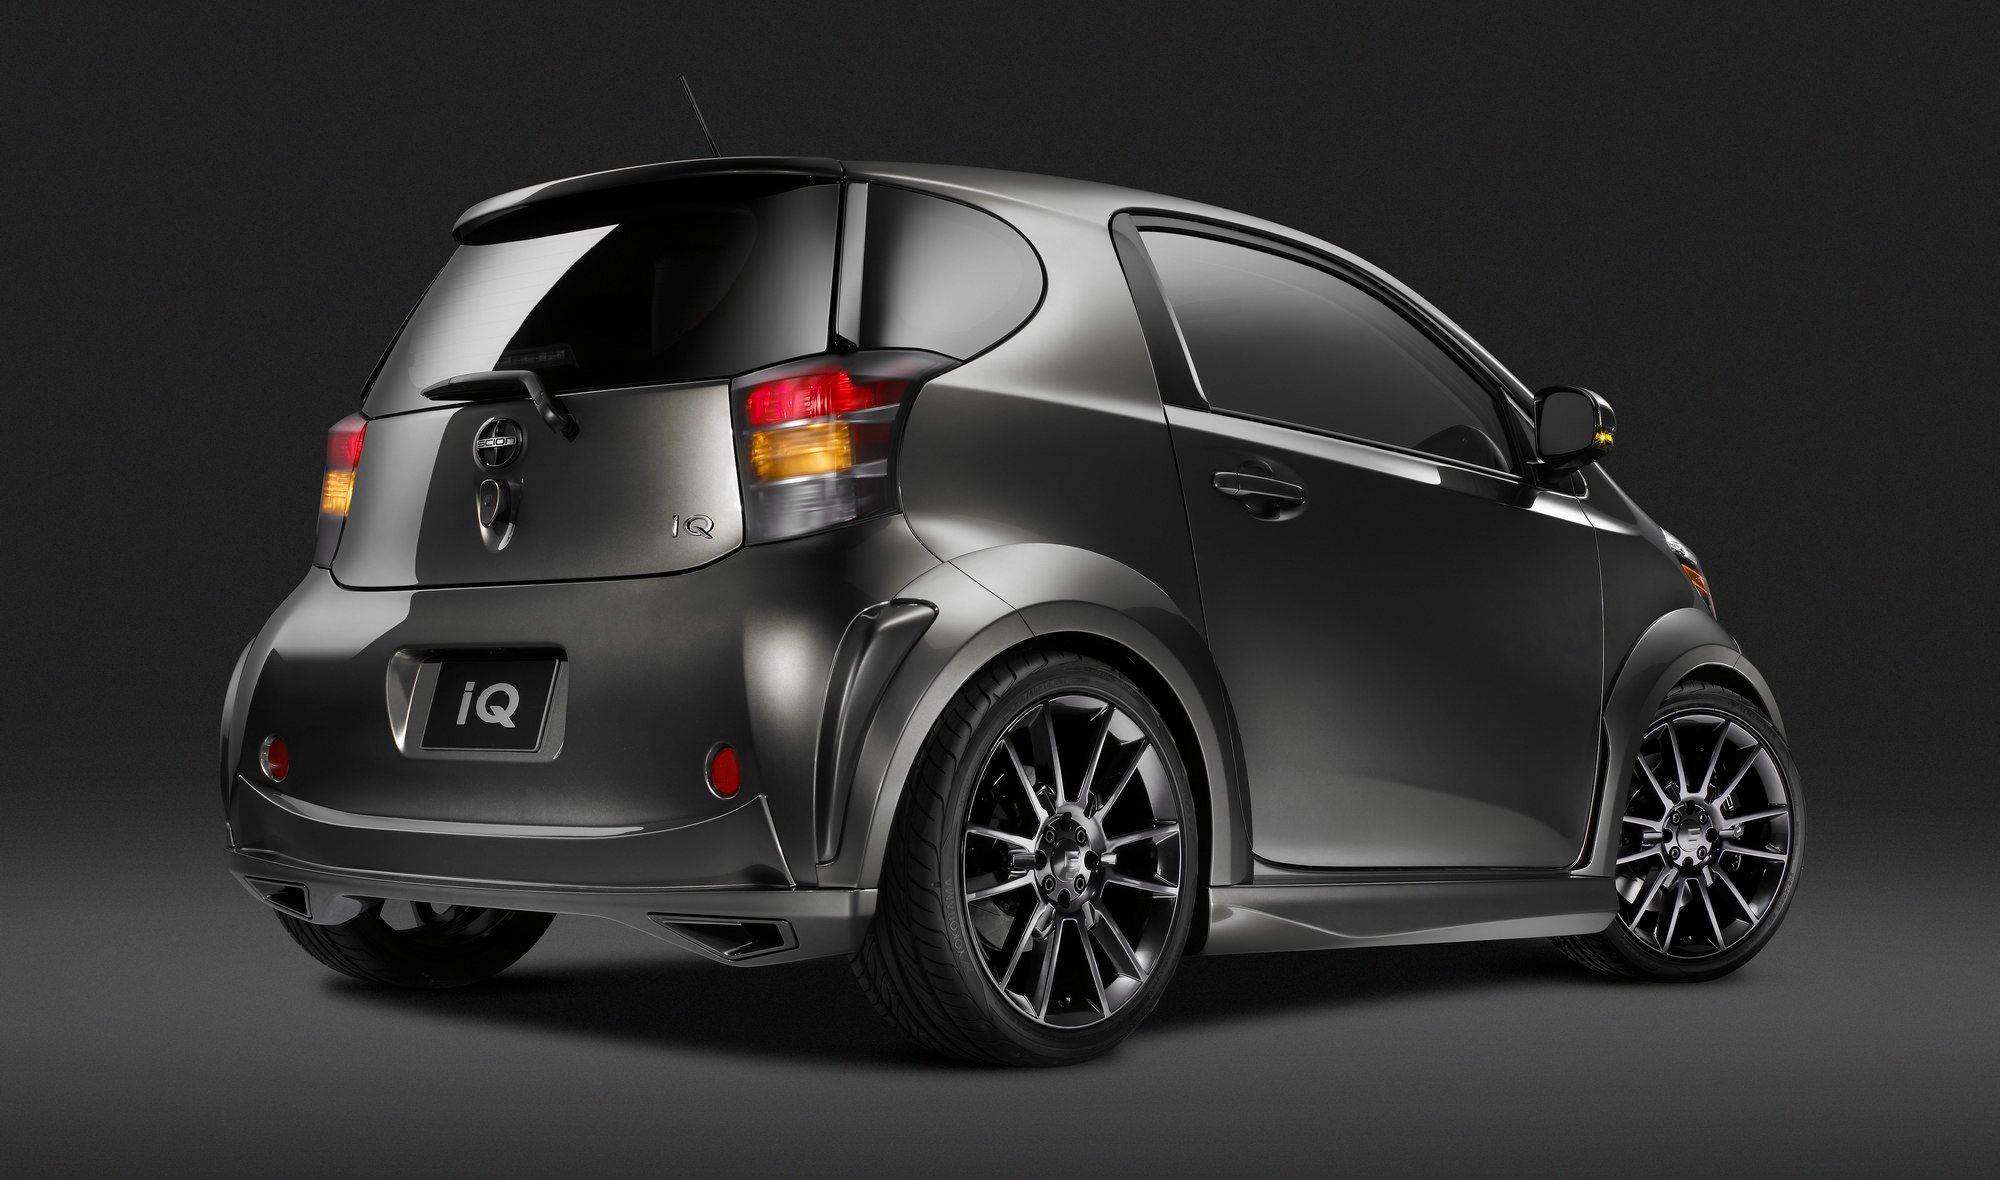 2011 Scion iQ by Five Axis